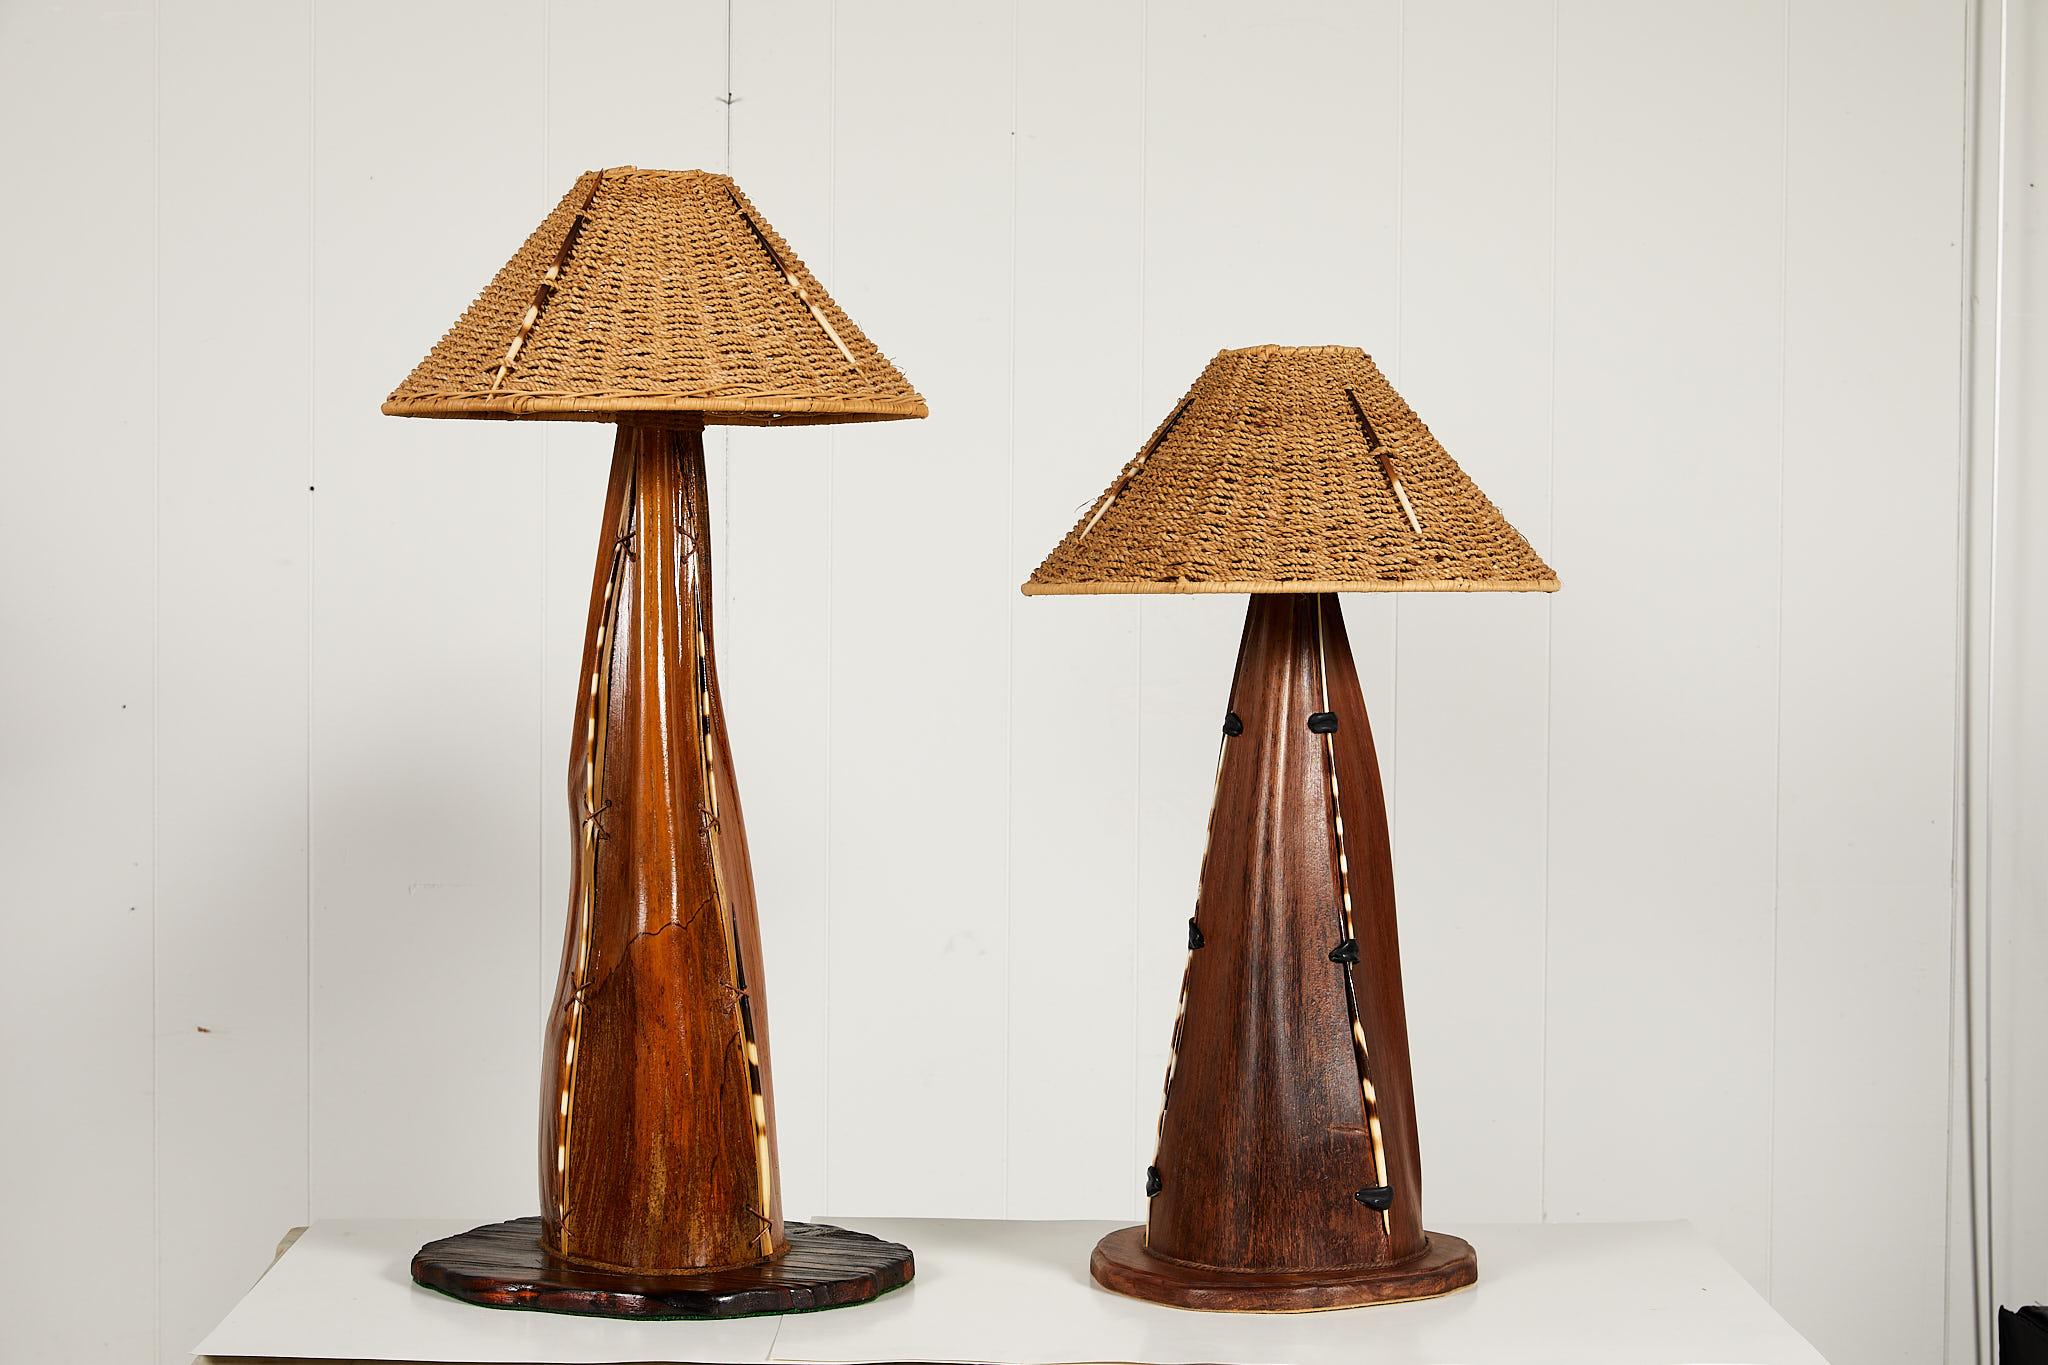 Unusual 20th century friendly pair of Folk Art lamp bases creatively made of palm frond seed pods. The palm fronds were stained and mounted onto hand carved wooden bases. Quills are attached by cord and leather to decorate the seams. Each lamp is